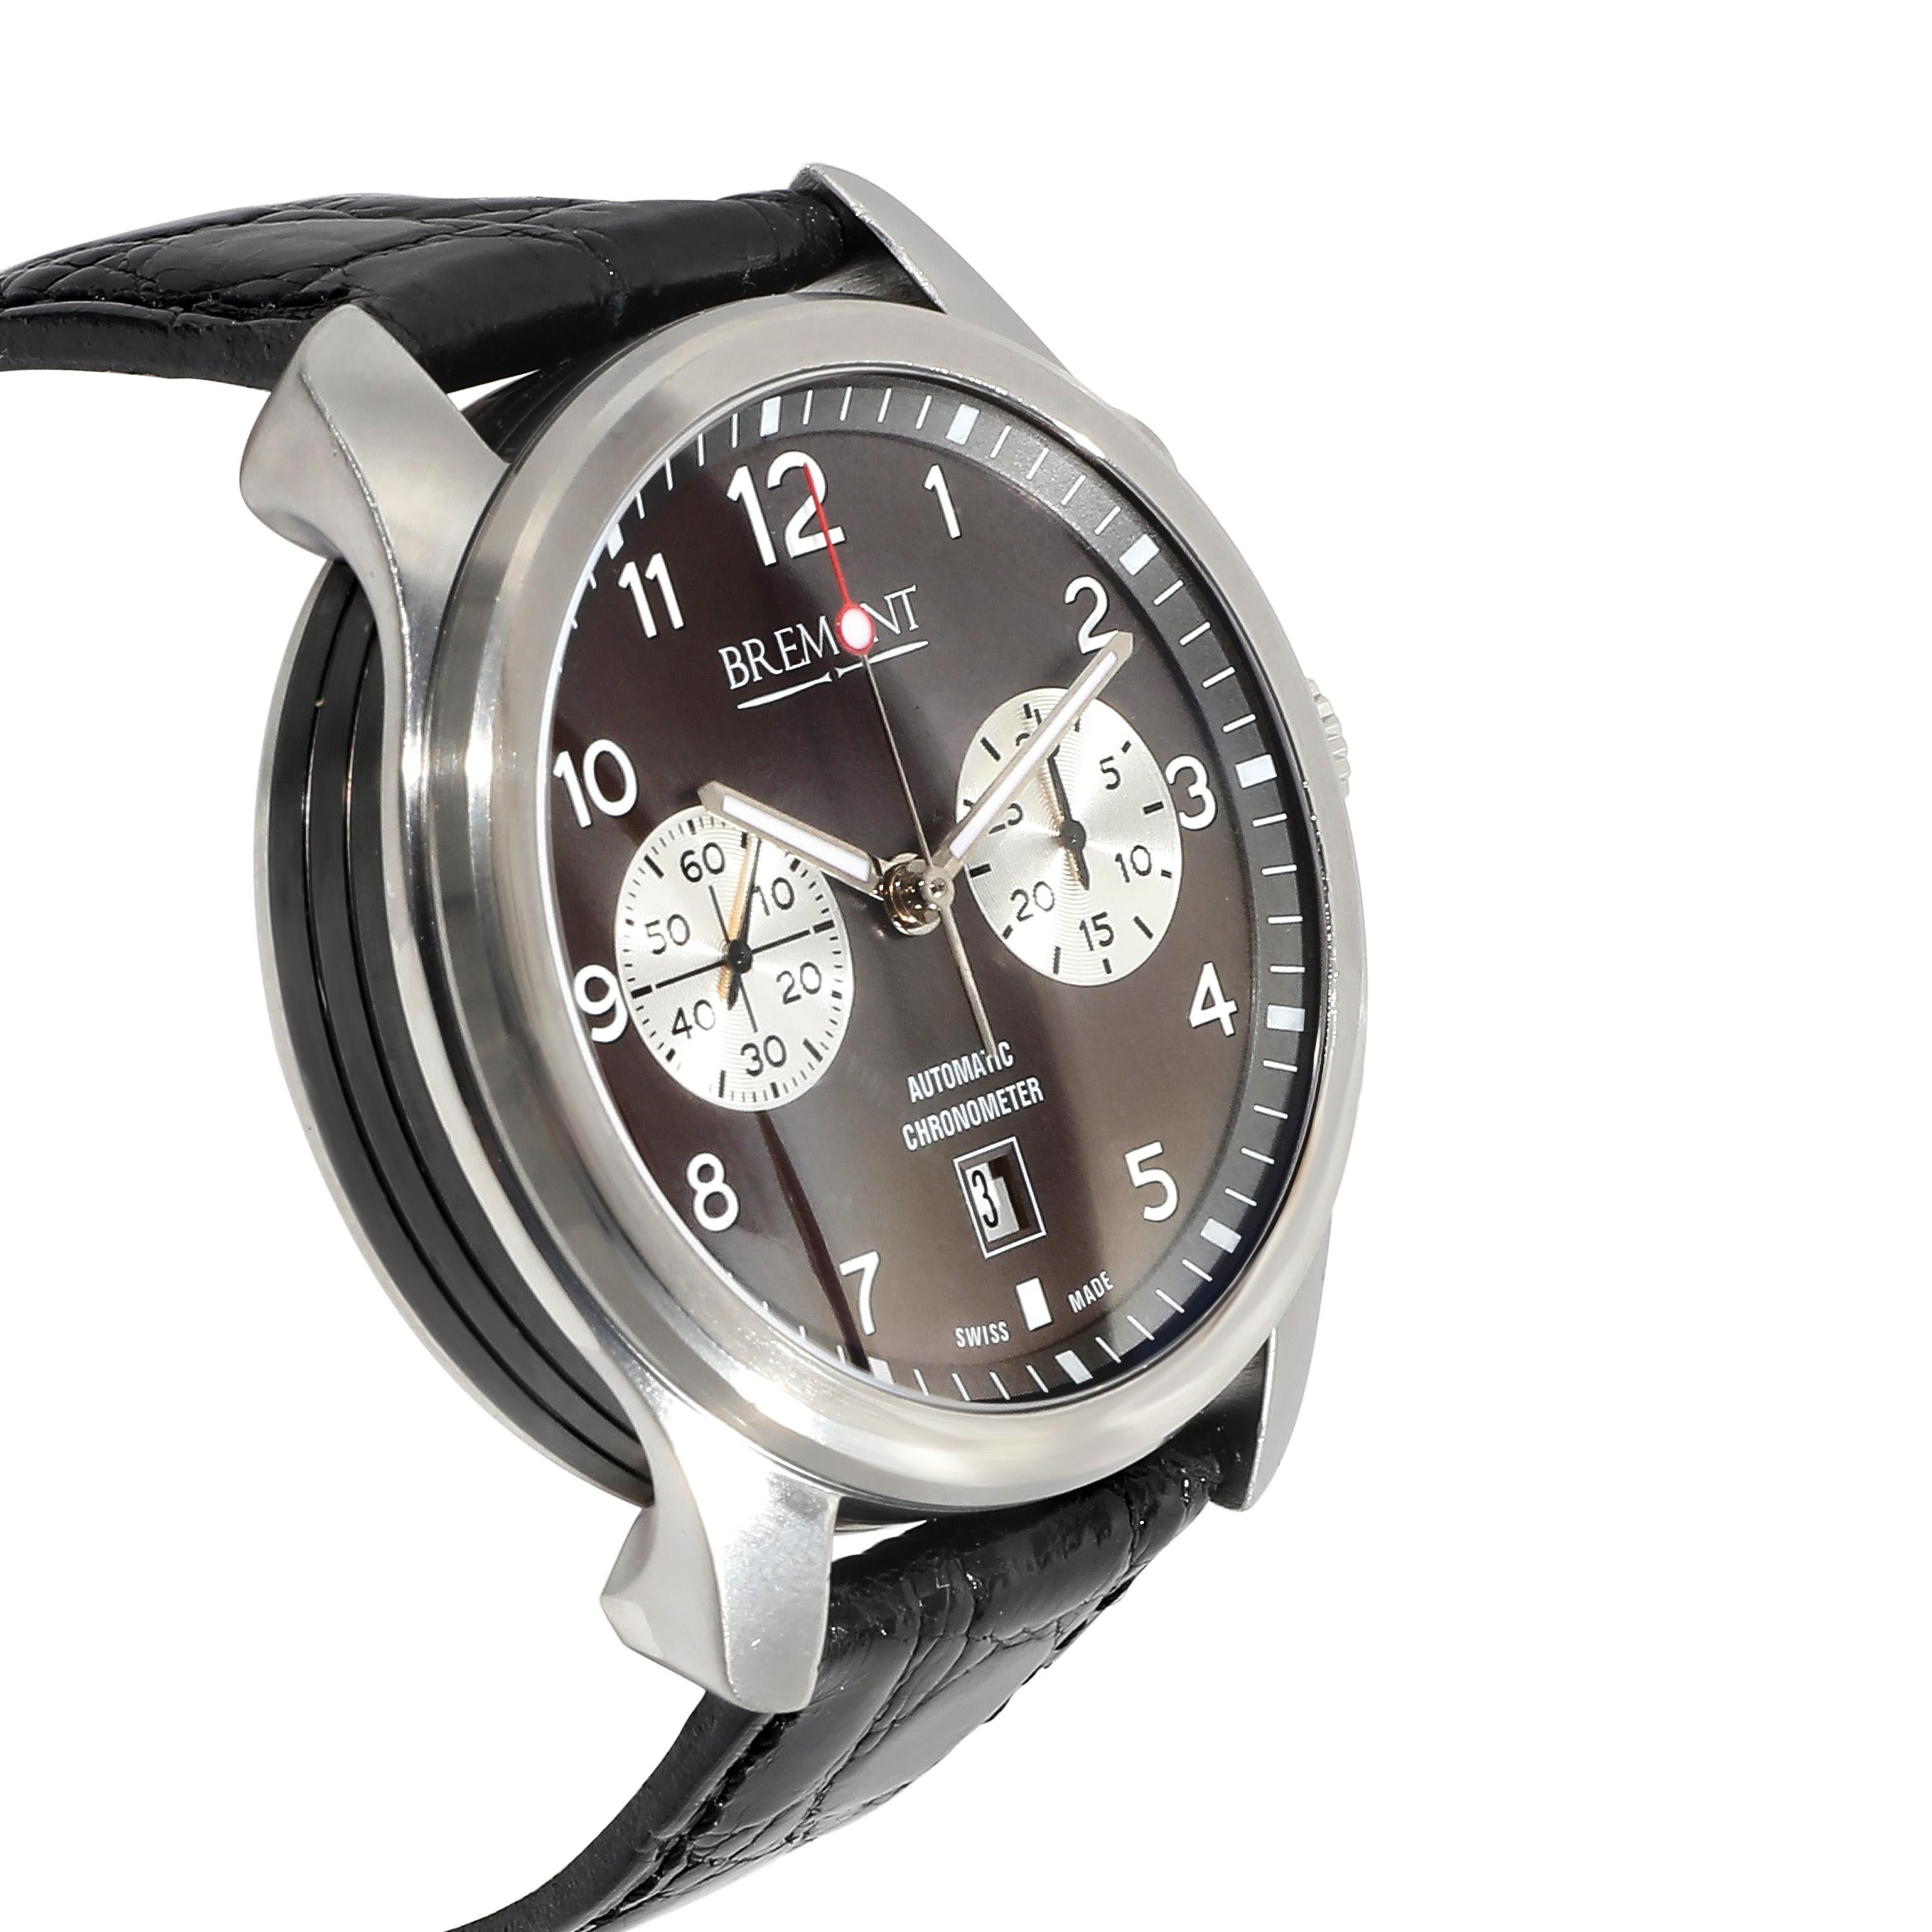 
Bremont Bremont ALT1-C Classic ALT1-C Men's Watch in DLC

SKU: 134446

PRIMARY DETAILS
Brand:  Bremont
Model: Bremont ALT1-C Classic
Country of Origin: Switzerland
Movement Type: Mechanical: Automatic/Kinetic
Year of Manufacture: